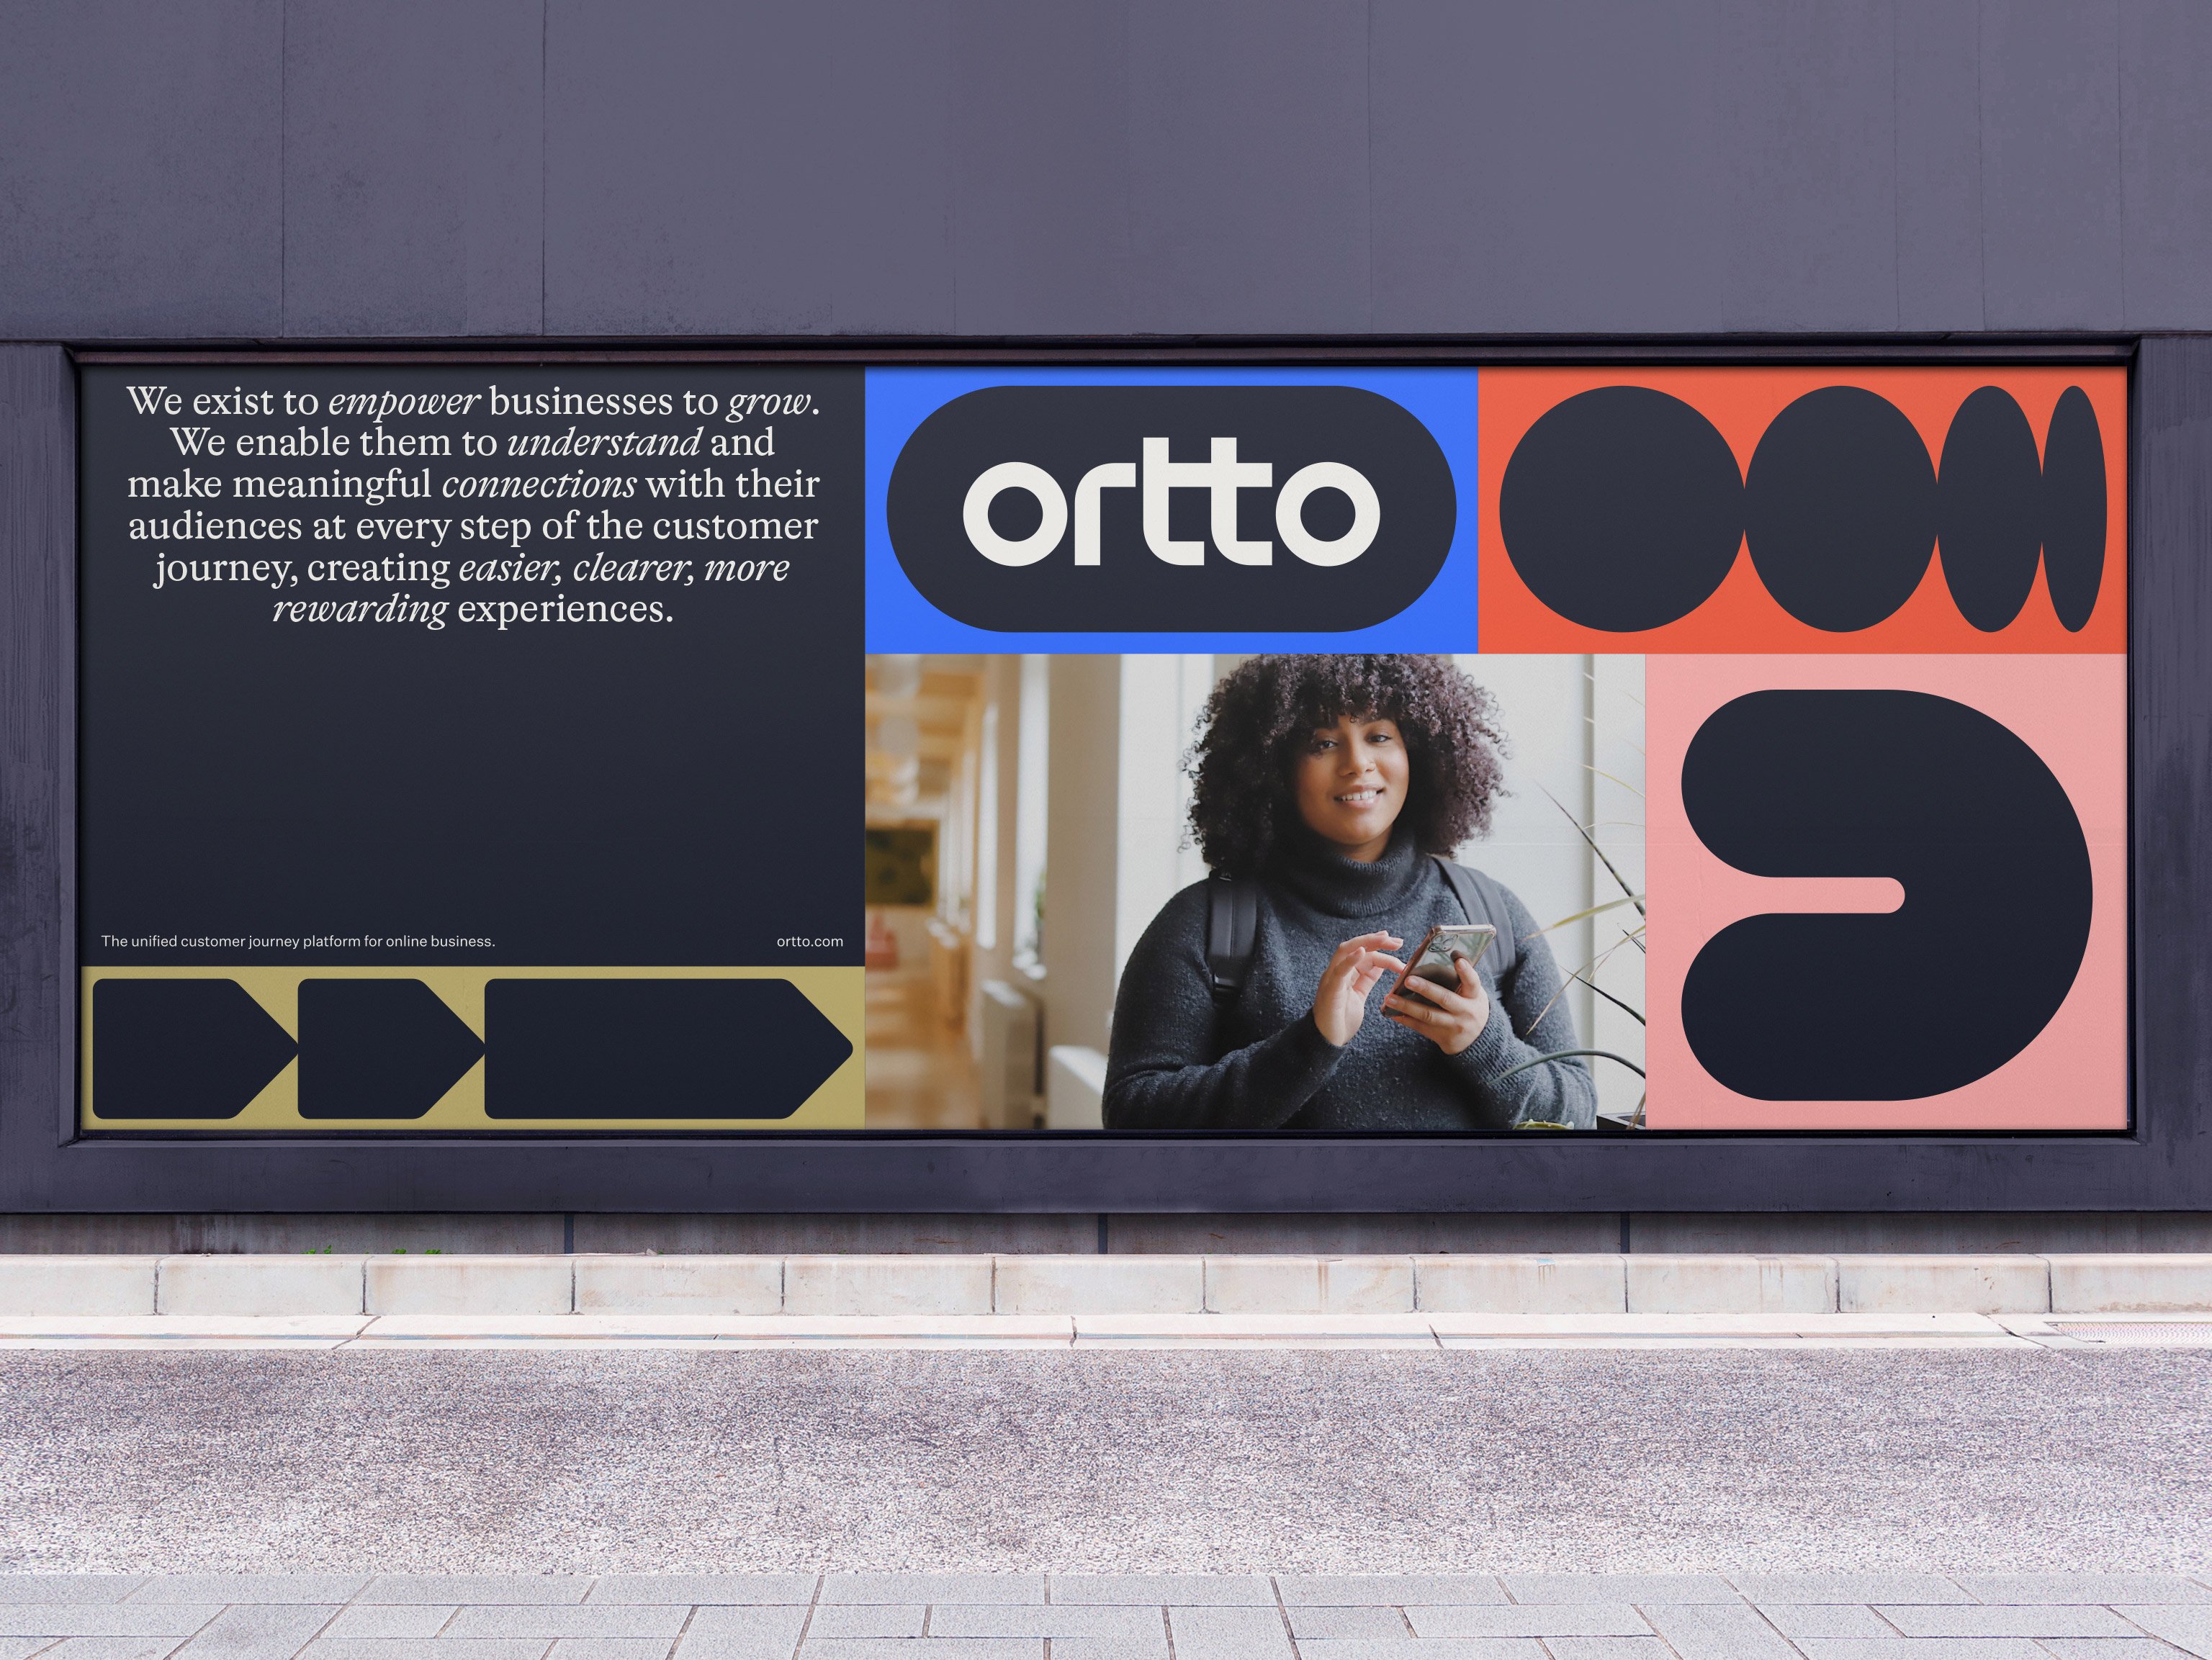 Brand identity and billboard for automation, analytics and customer journey company Ortto designed by Christopher Doyle & Co